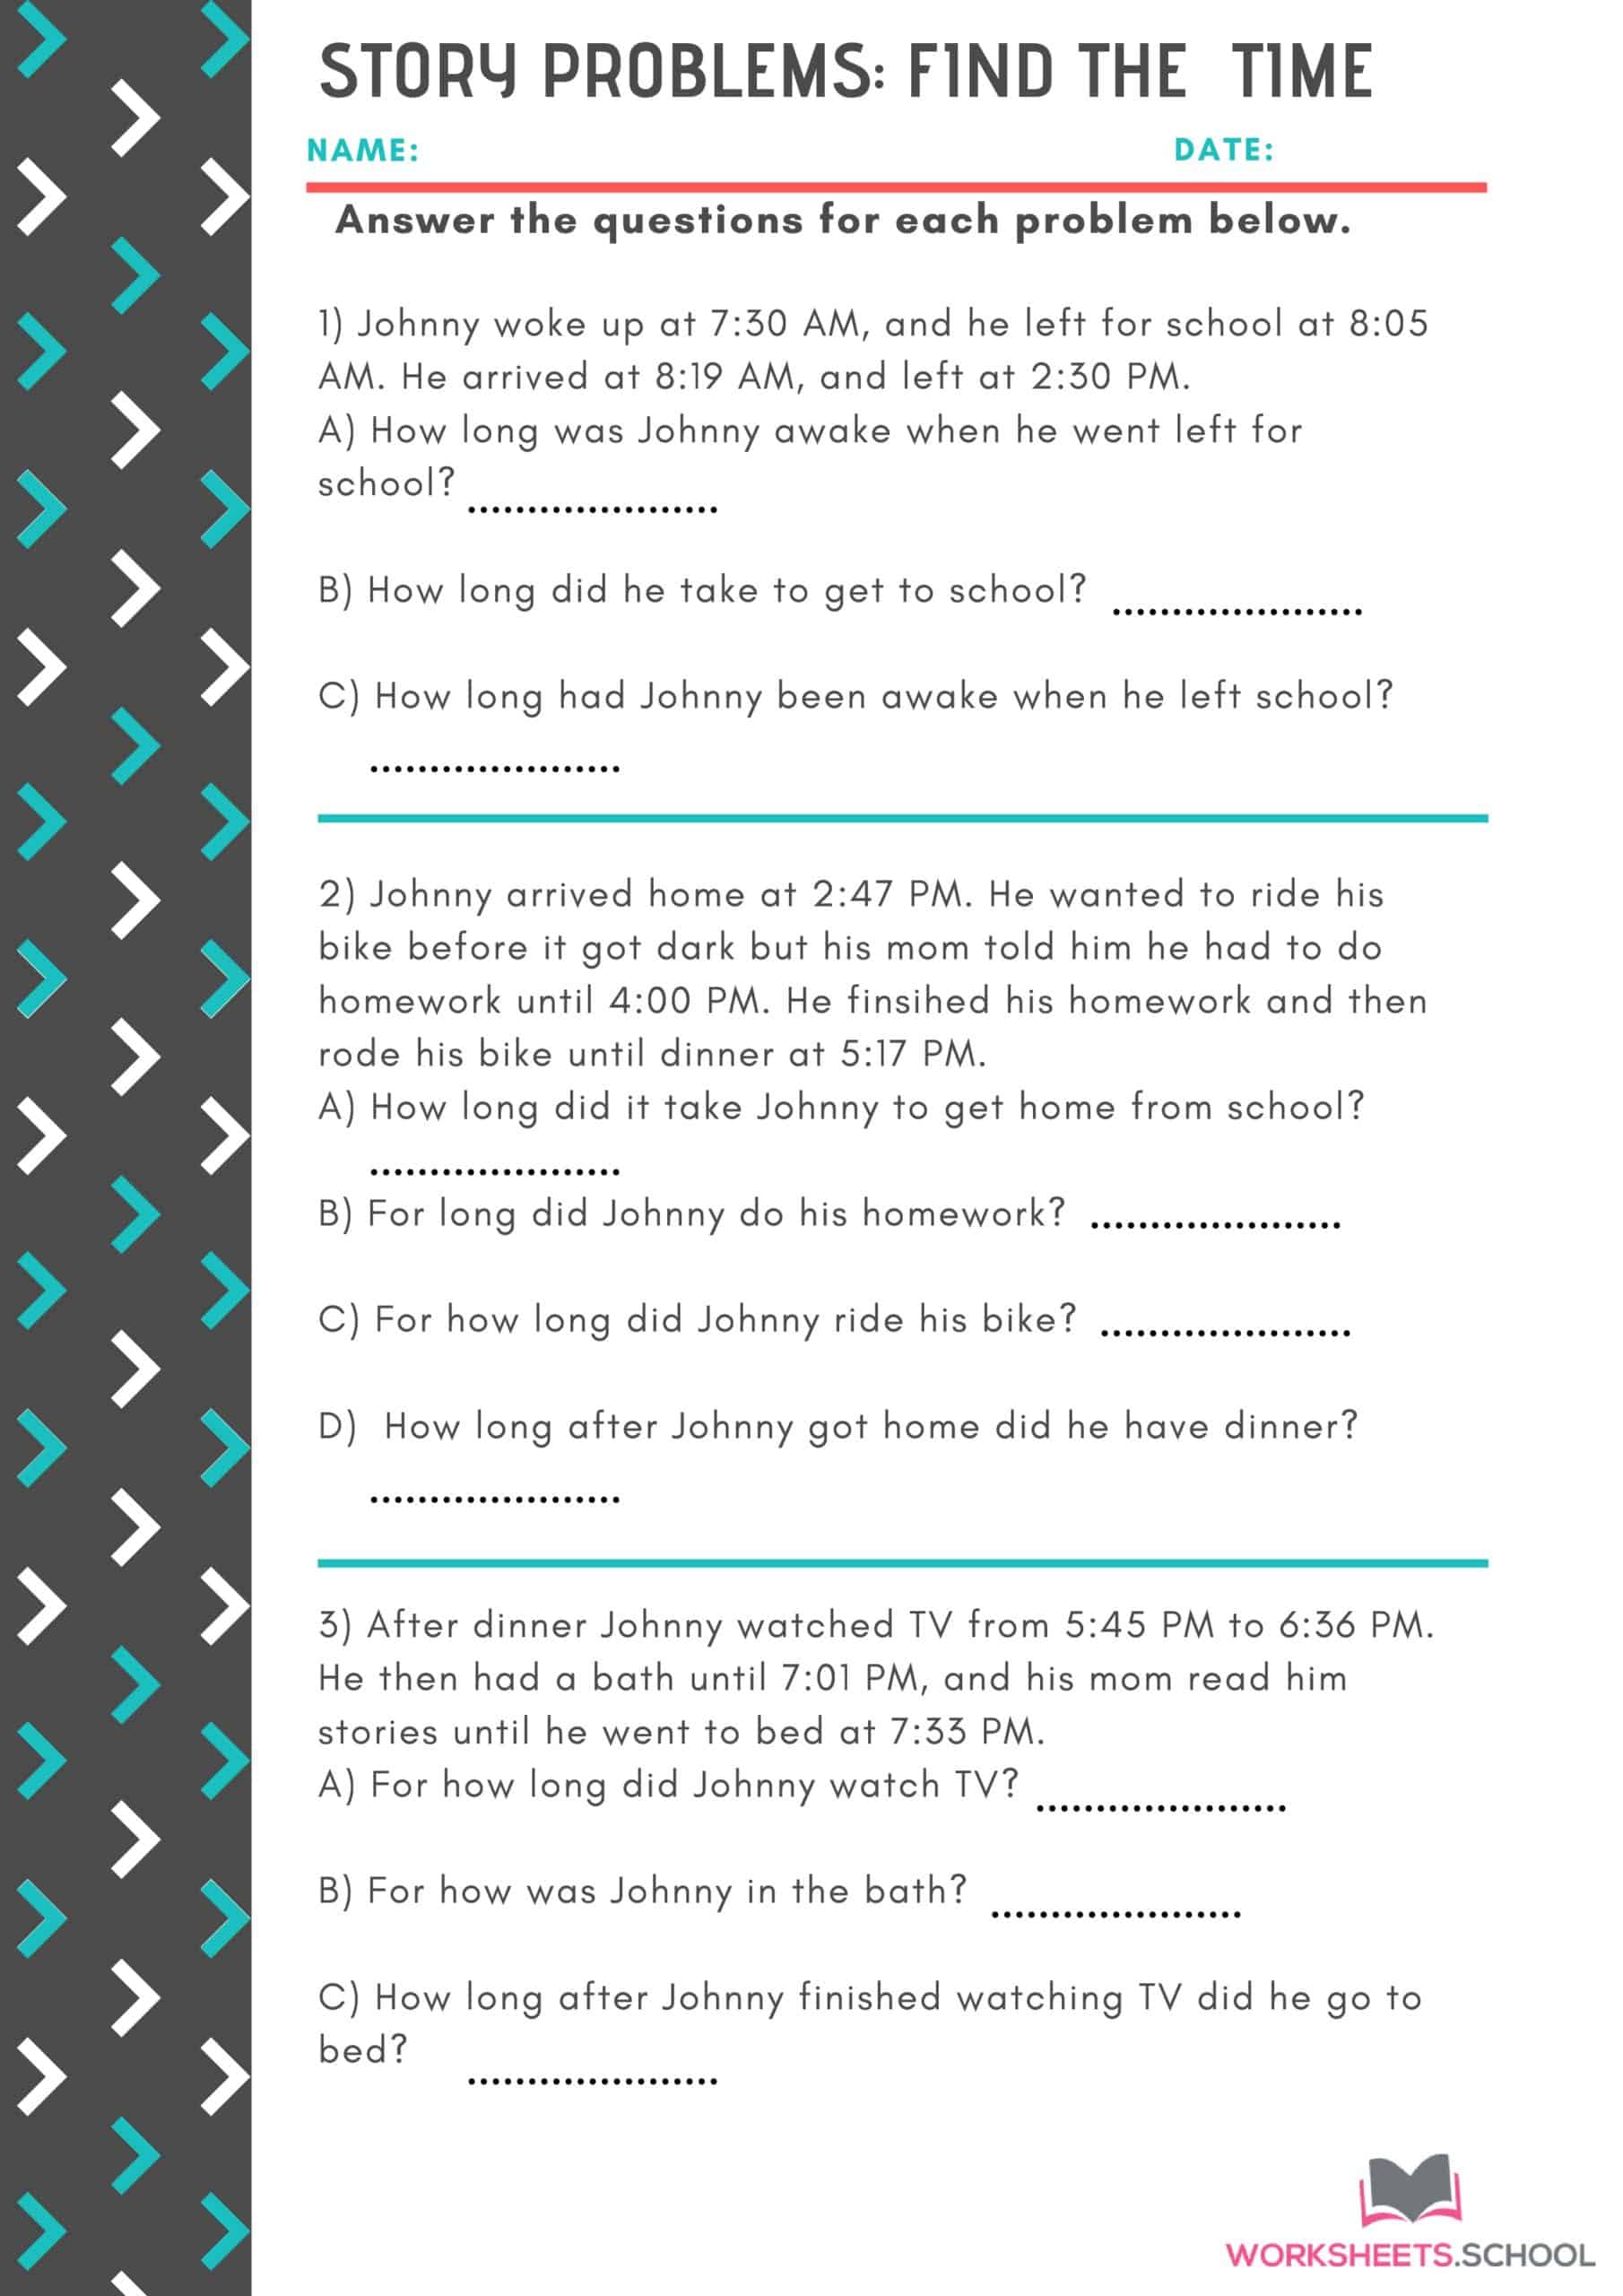 Story Problems - Find the Time Worksheet